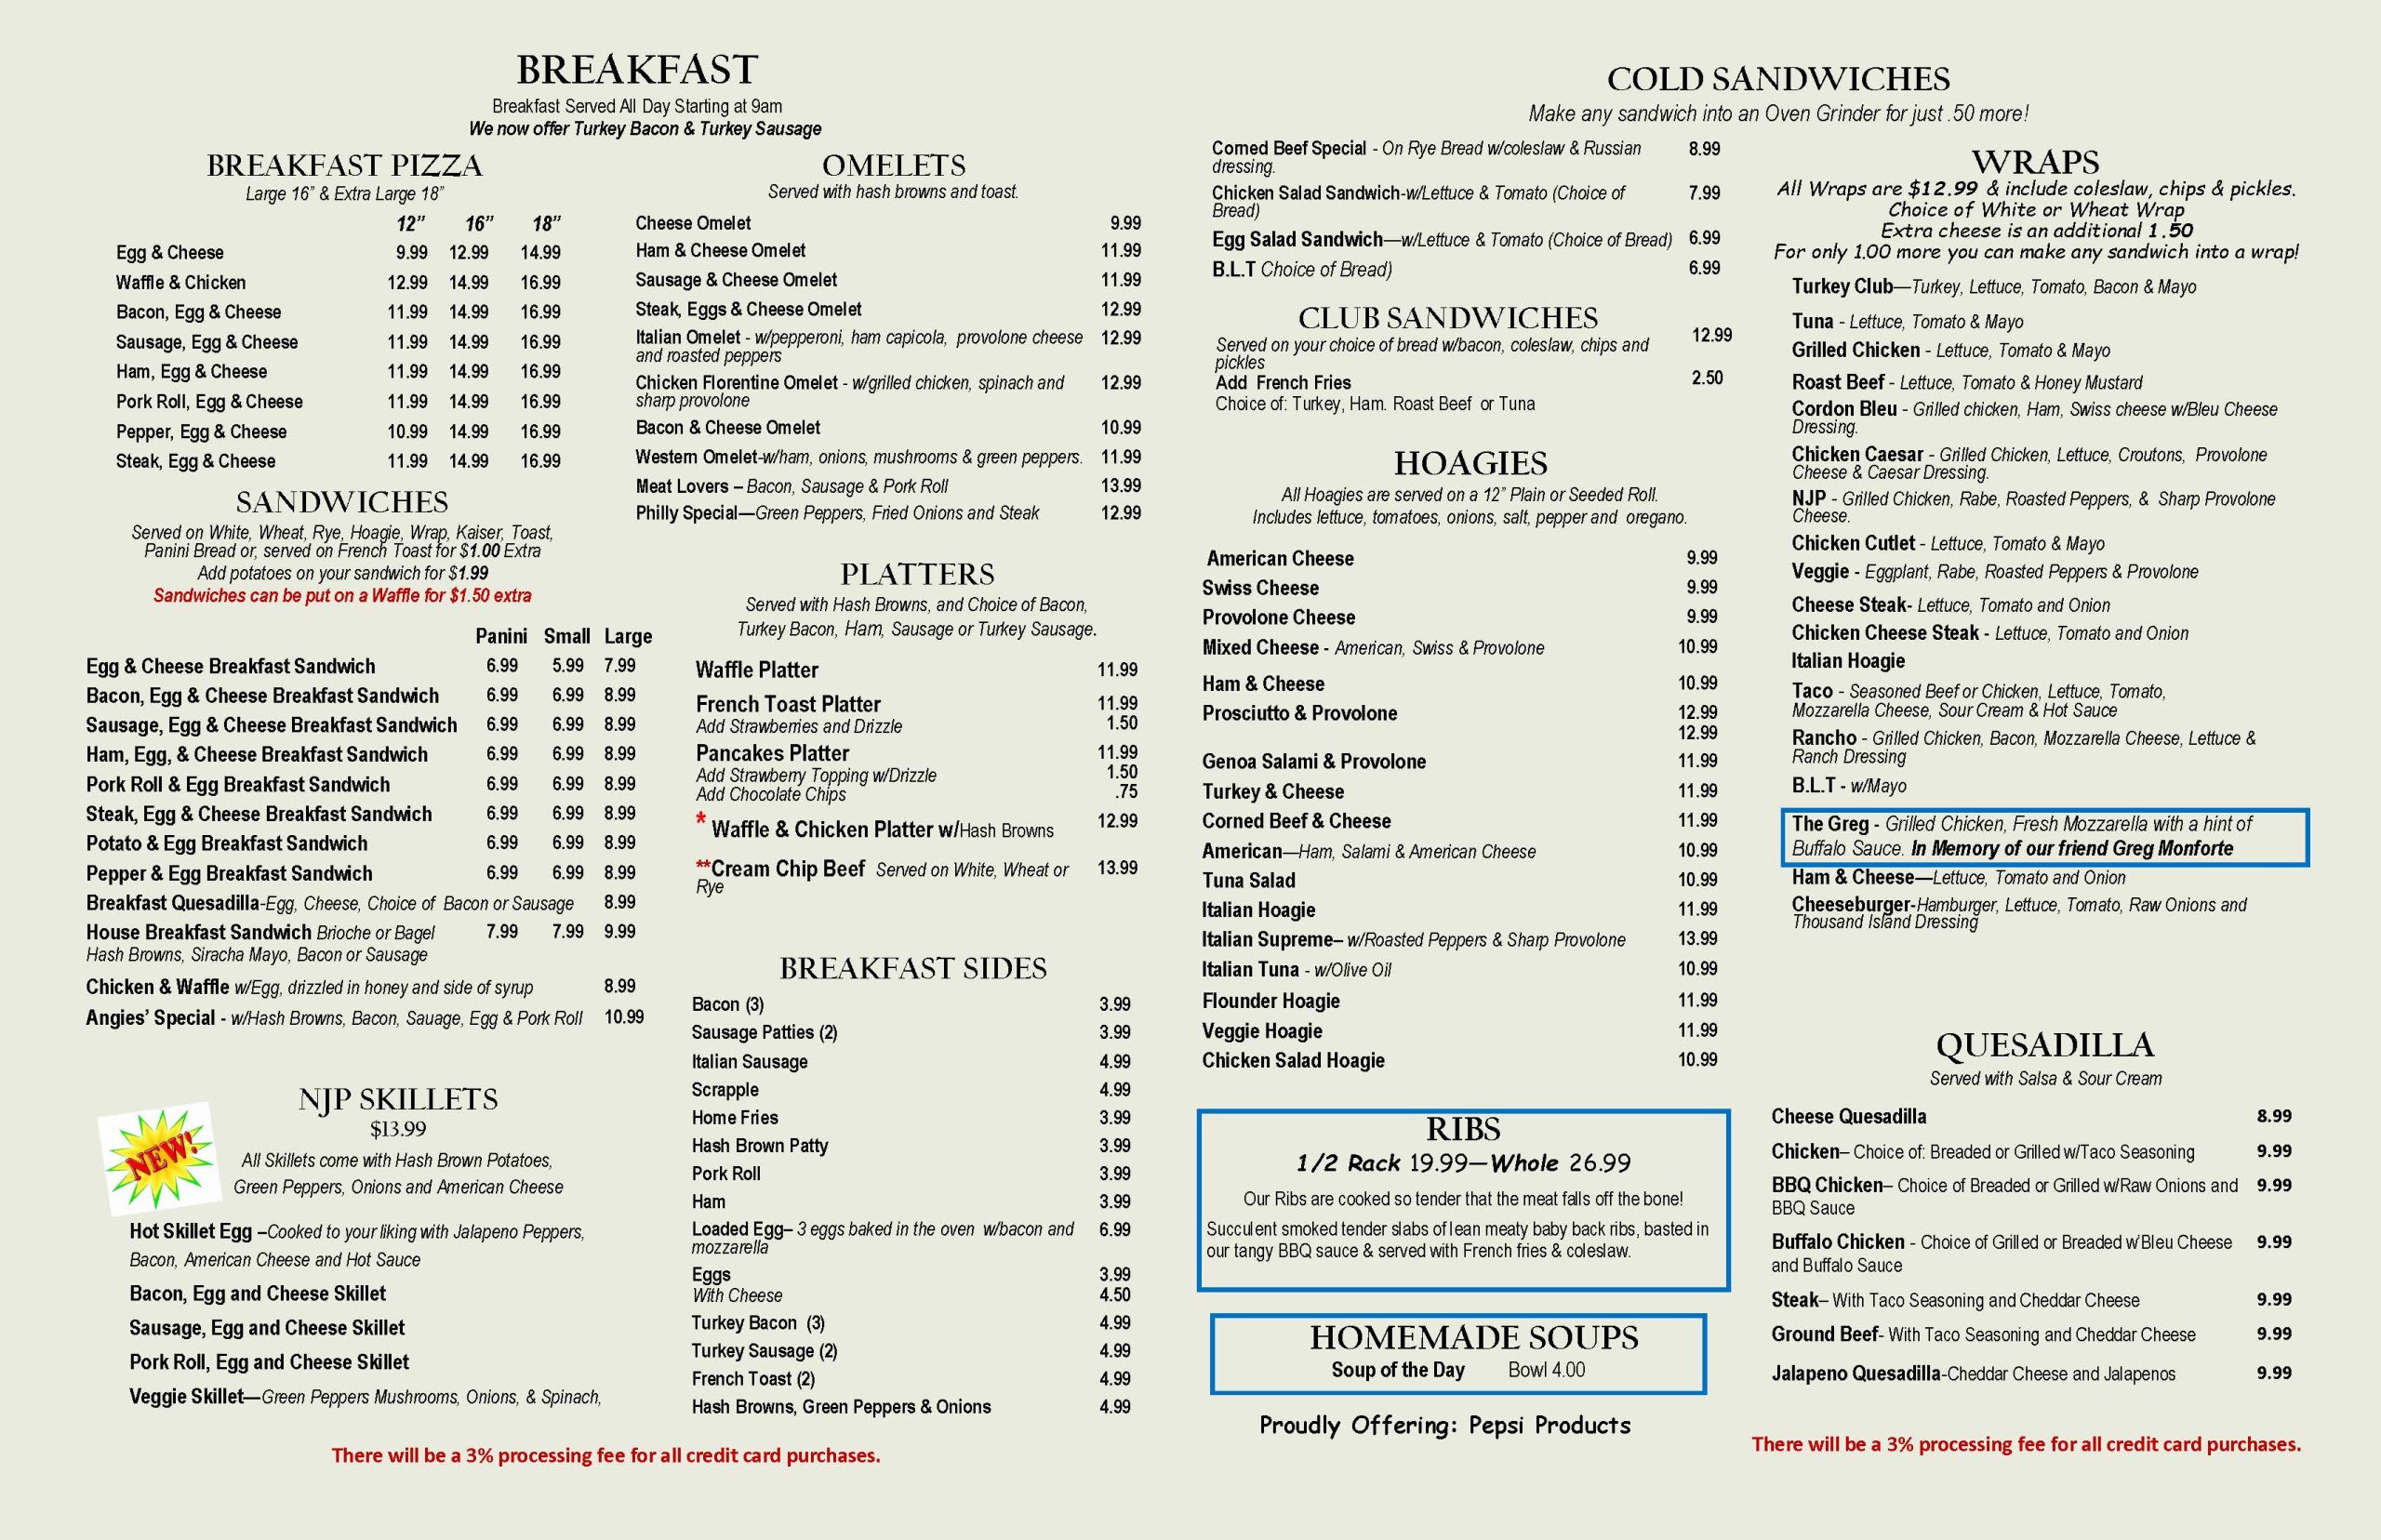 A menu for a restaurant with prices and prices.